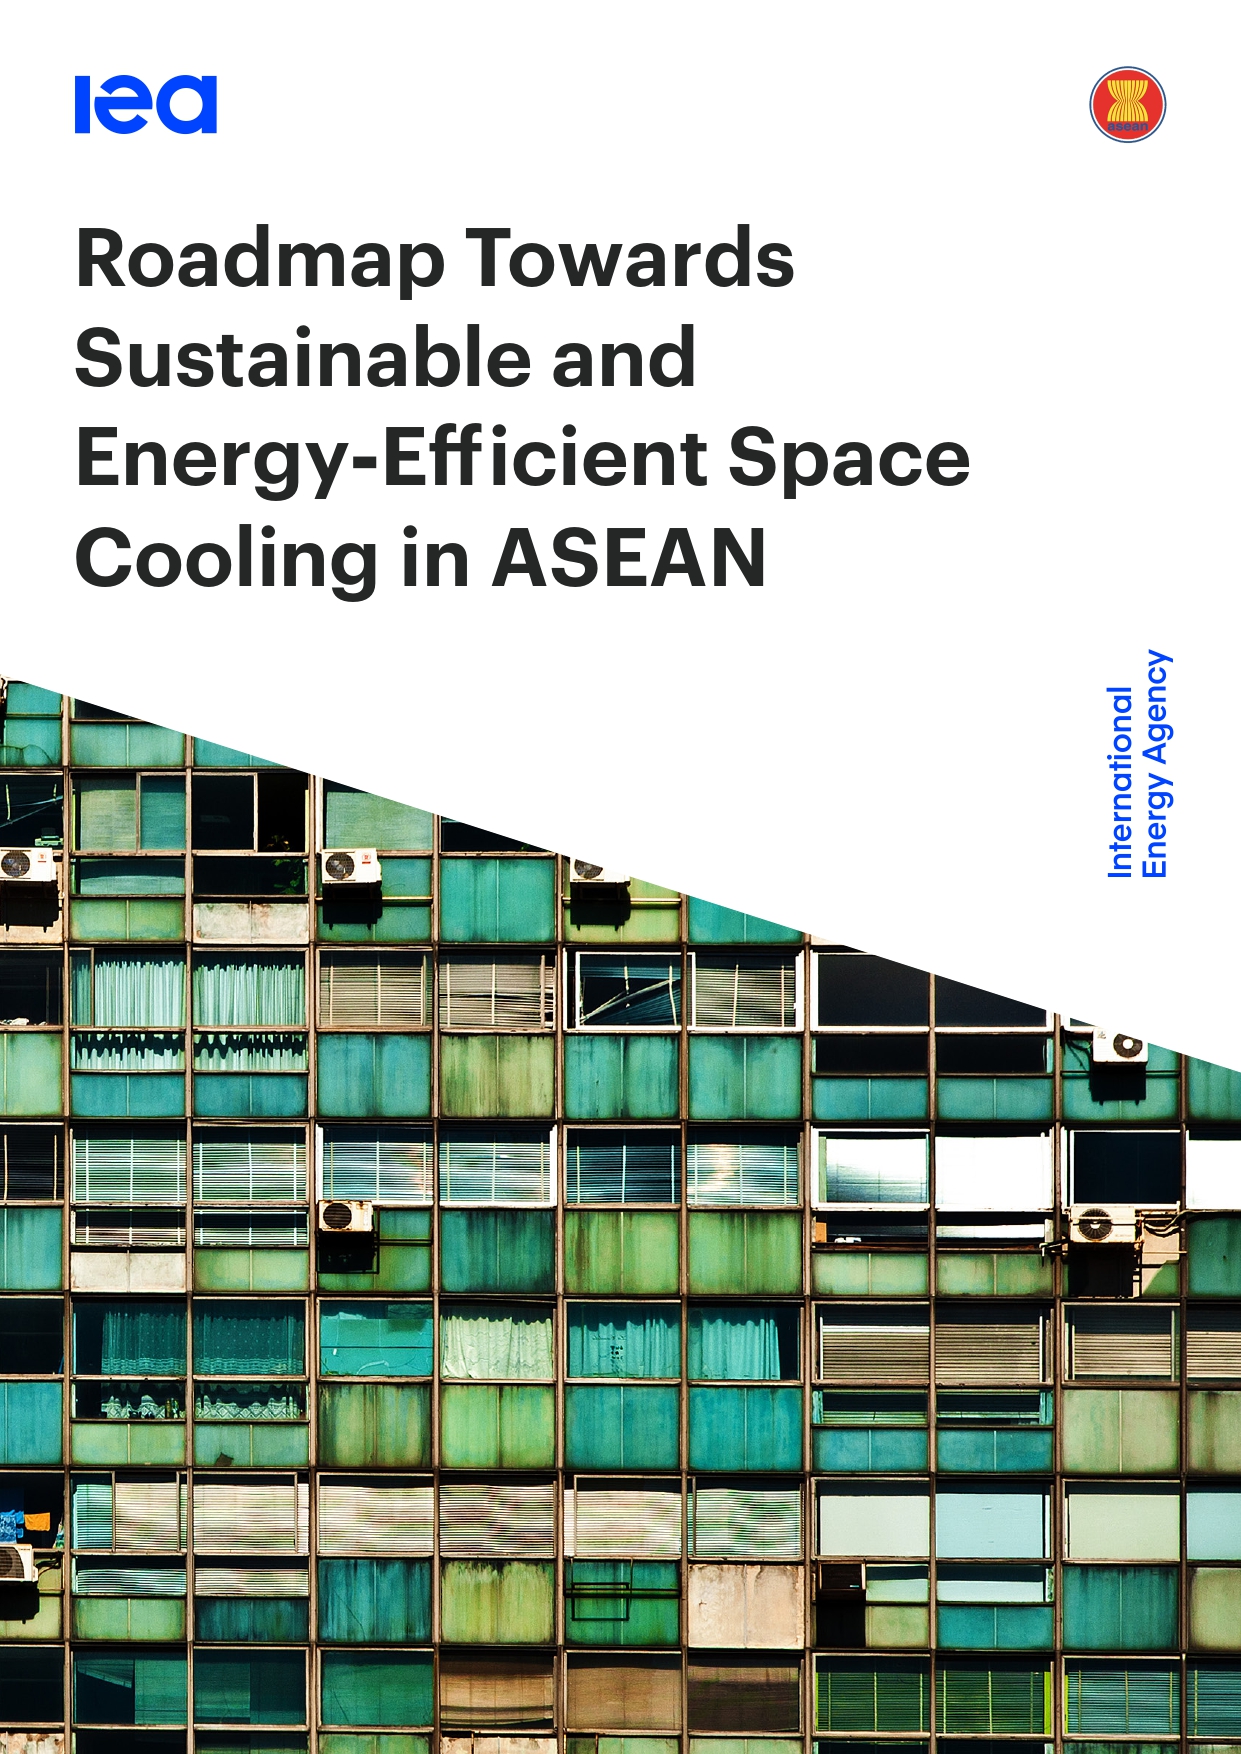 Roadmap Towards Sustainable and Energy-Efficient Space Cooling in ASEAN